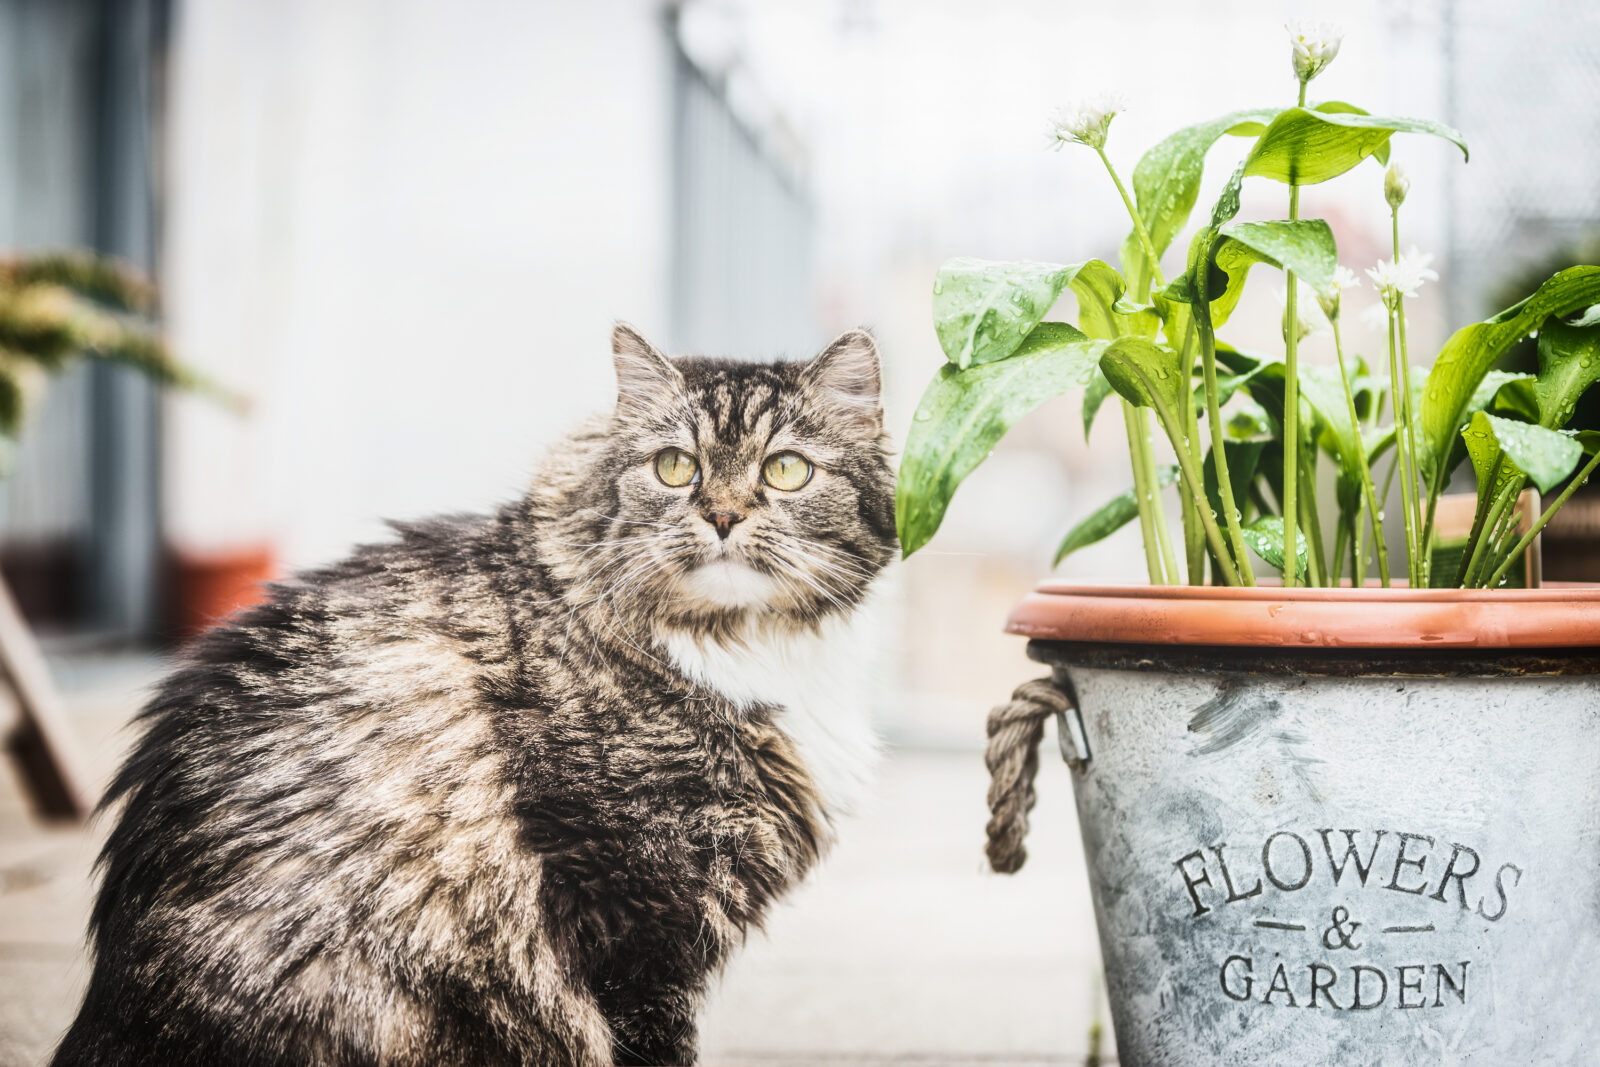 pet safety tips on house plants